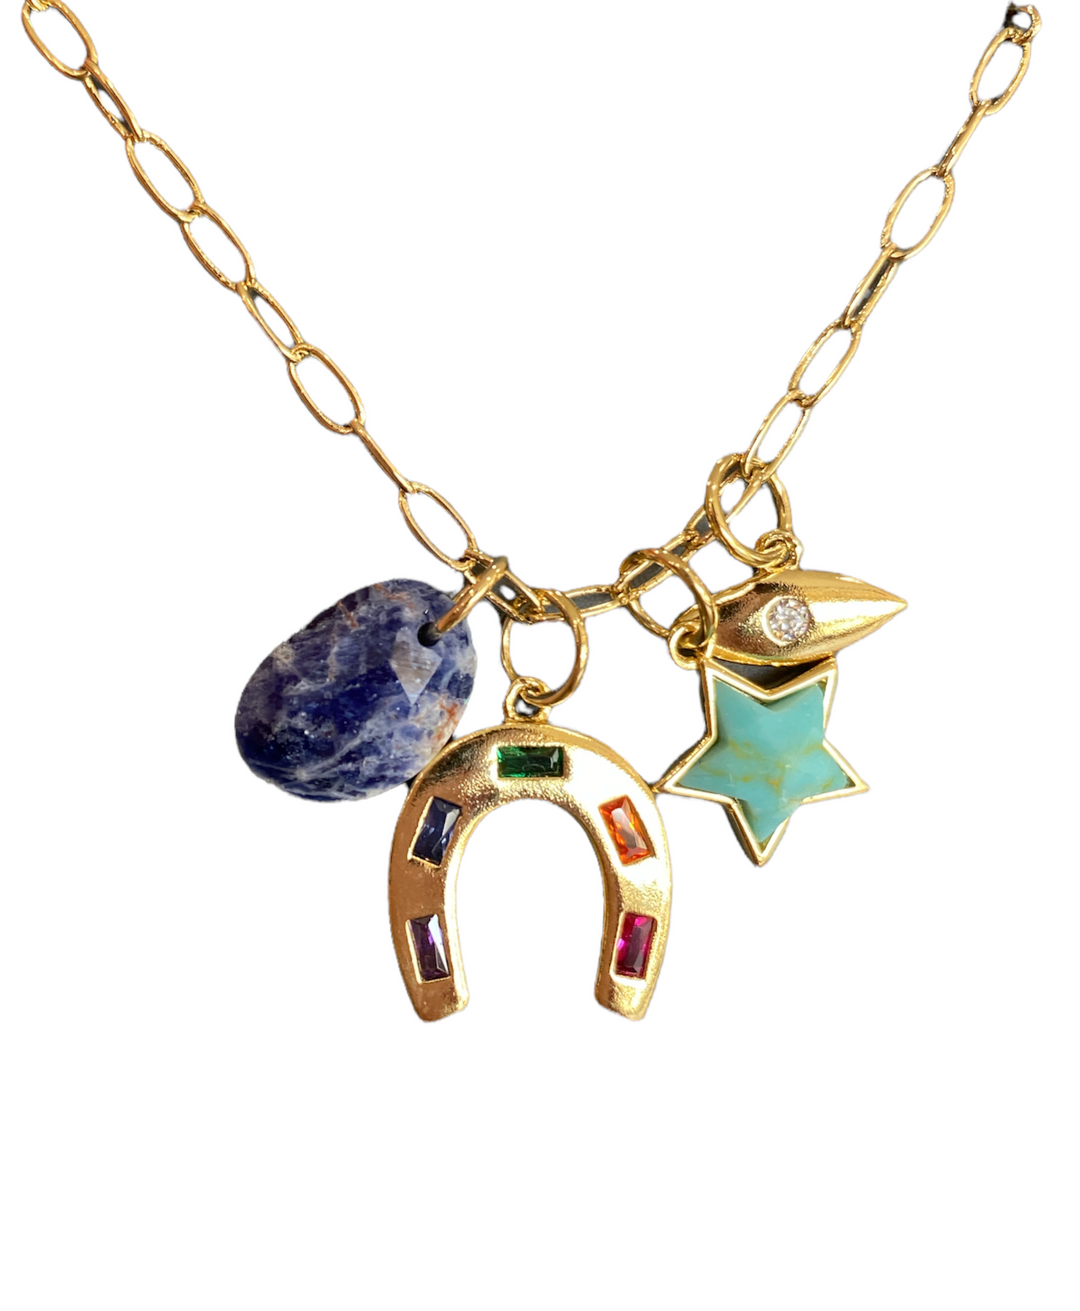 GOLD HORSESHOE STAR CHARM NECKLACE - Kingfisher Road - Online Boutique